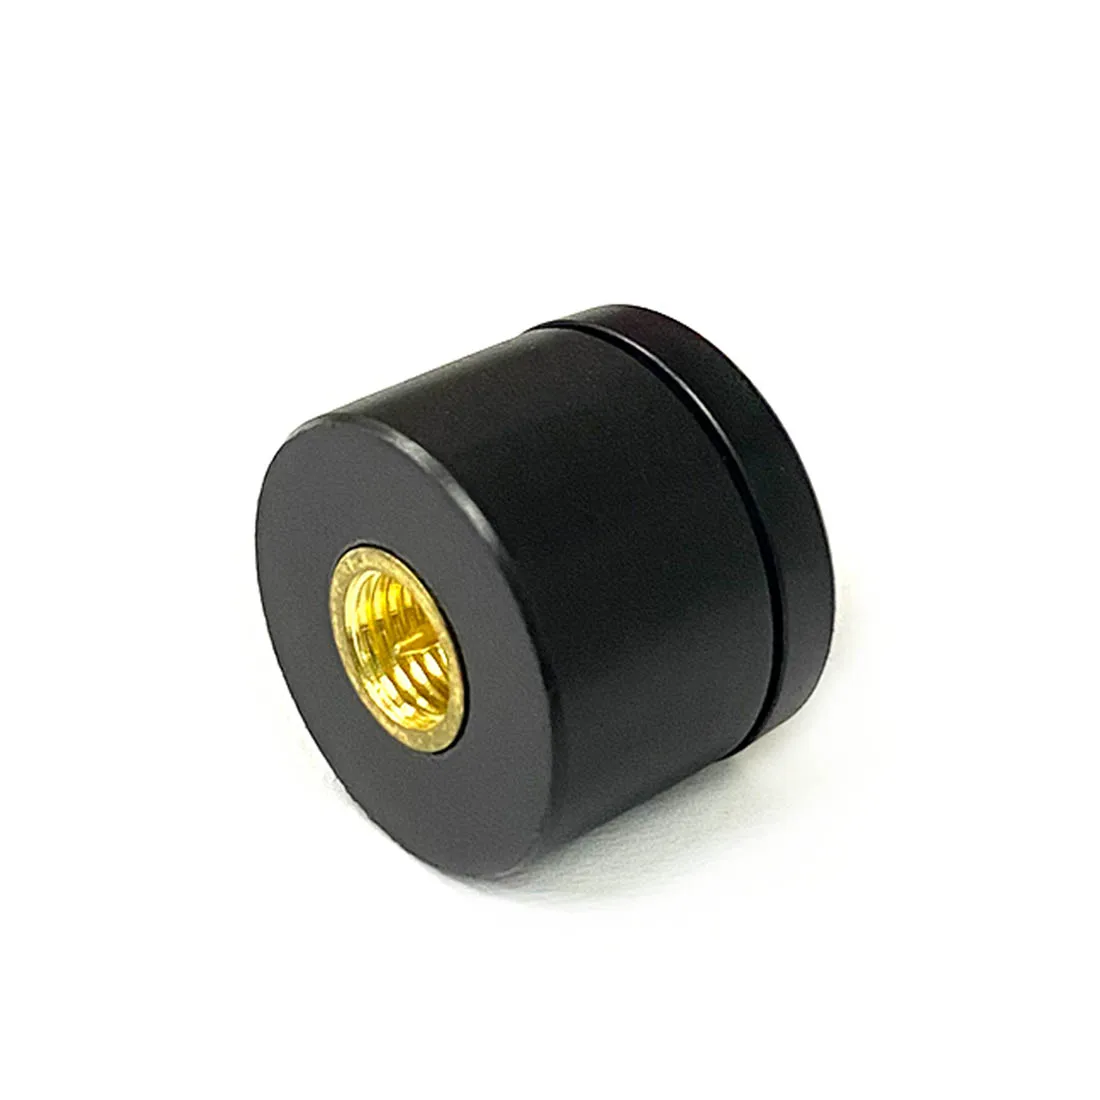 1PC 2.GHz MINI  Rubber Antenna 3dbi OMNI SMA Male Connector 14*18mm for Smart Home Bluetooth Router Network Card NEW